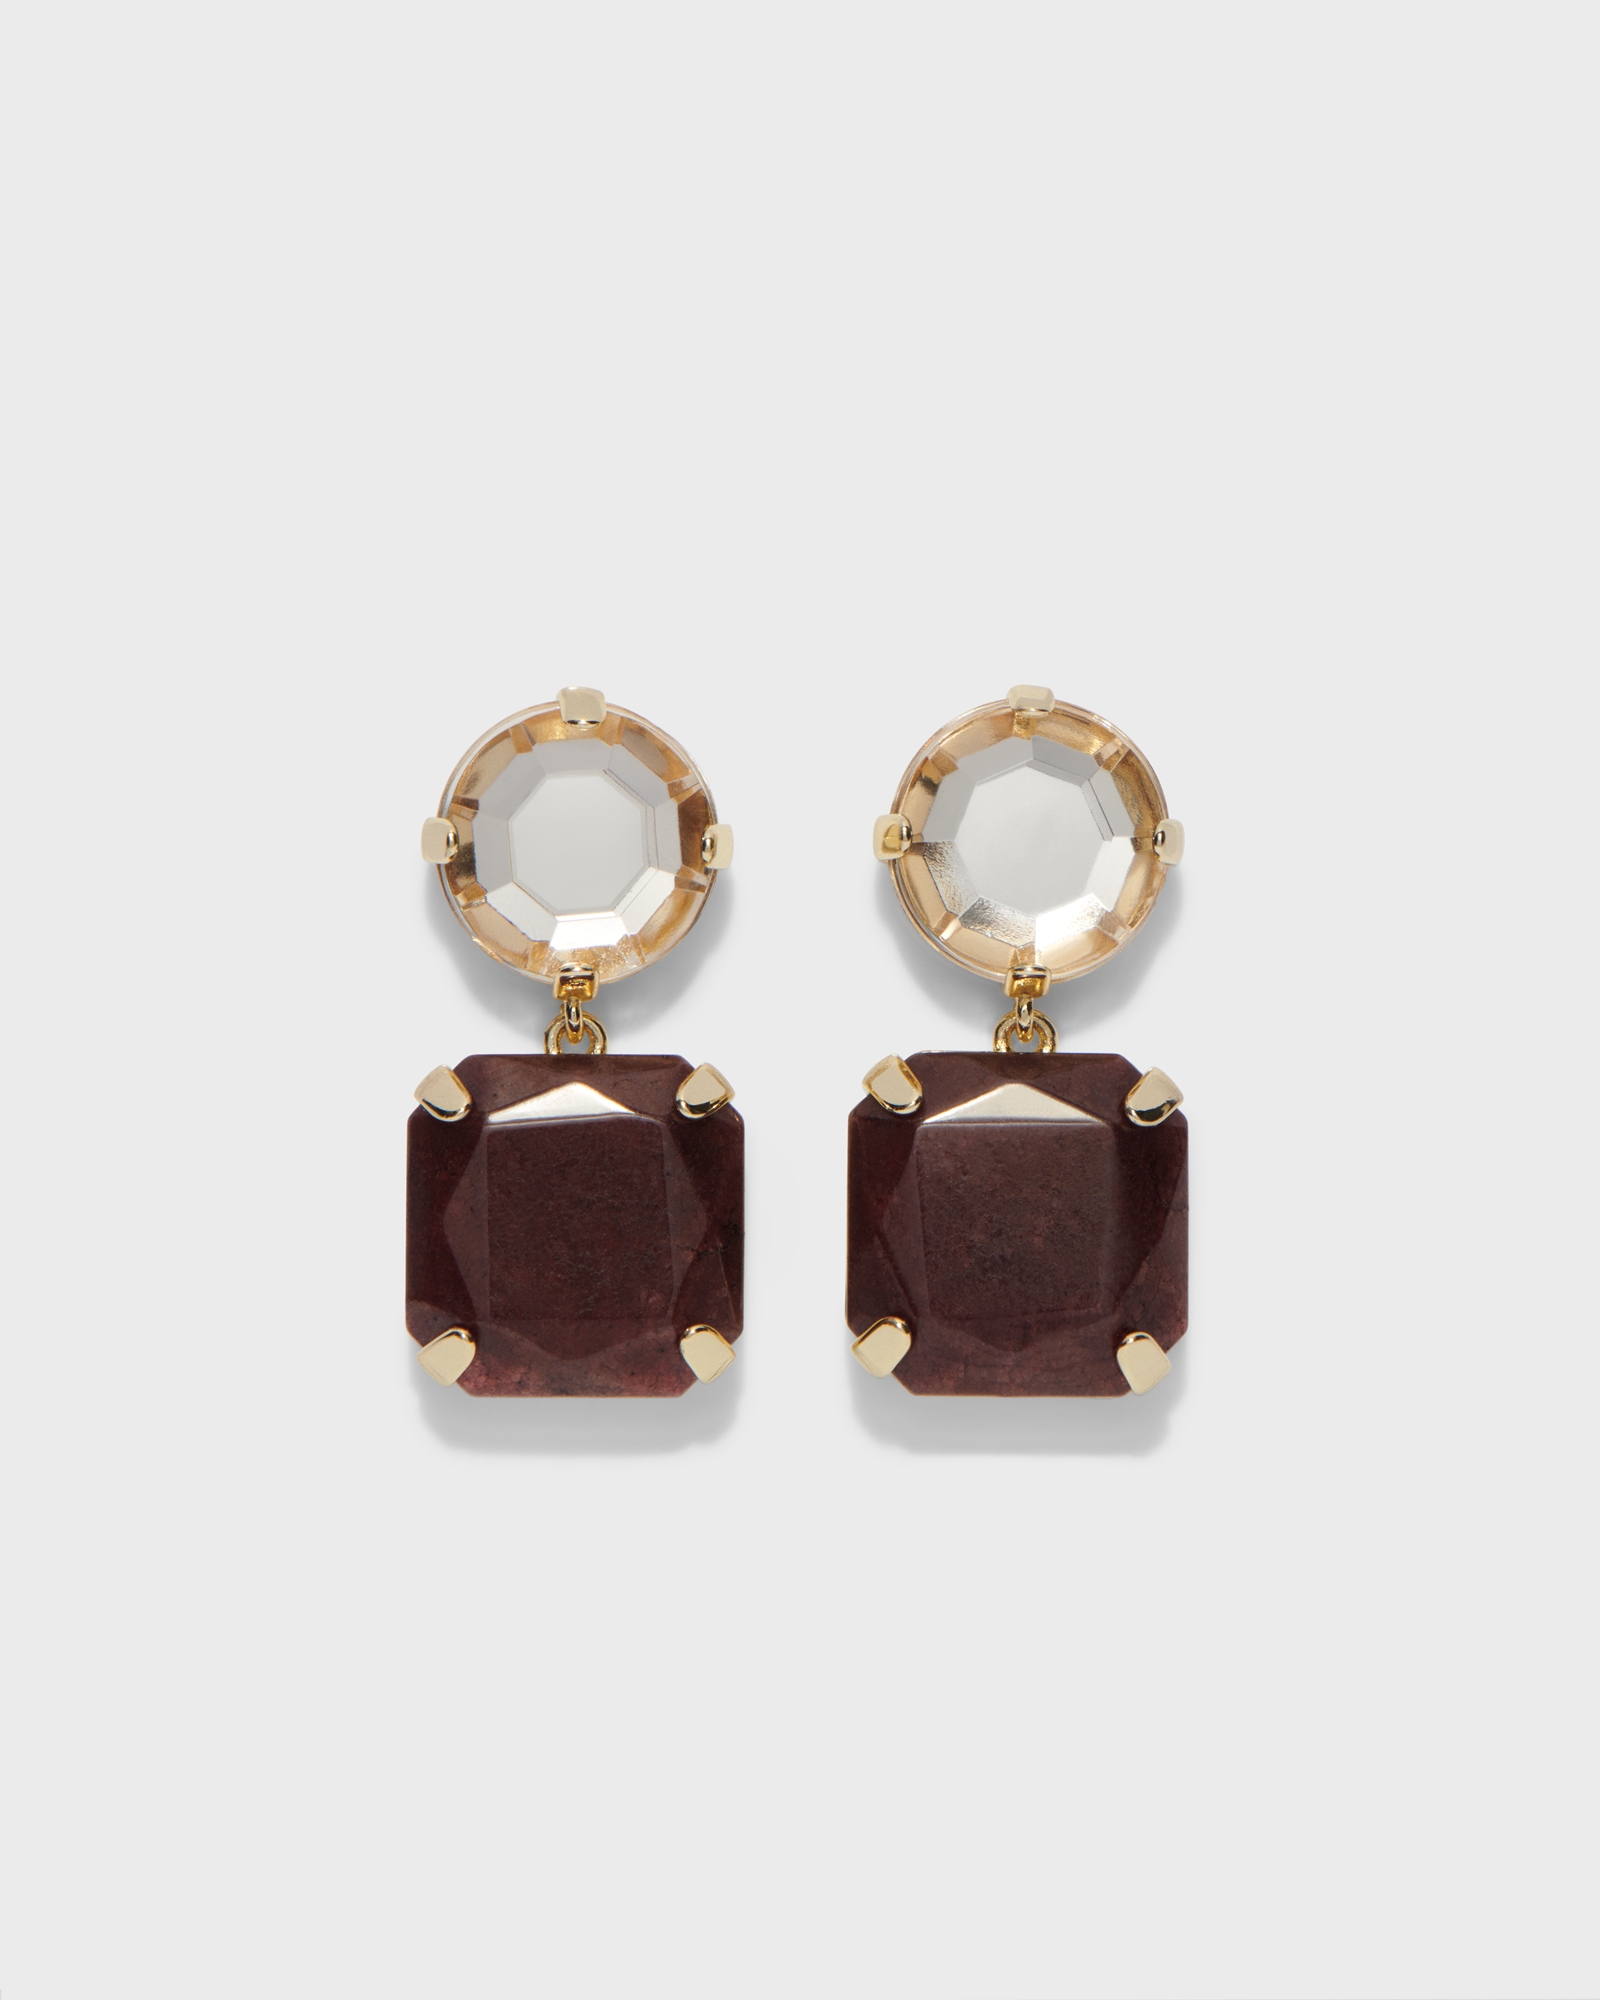 Accessories | Mixed Stone Earring | 999 Multi